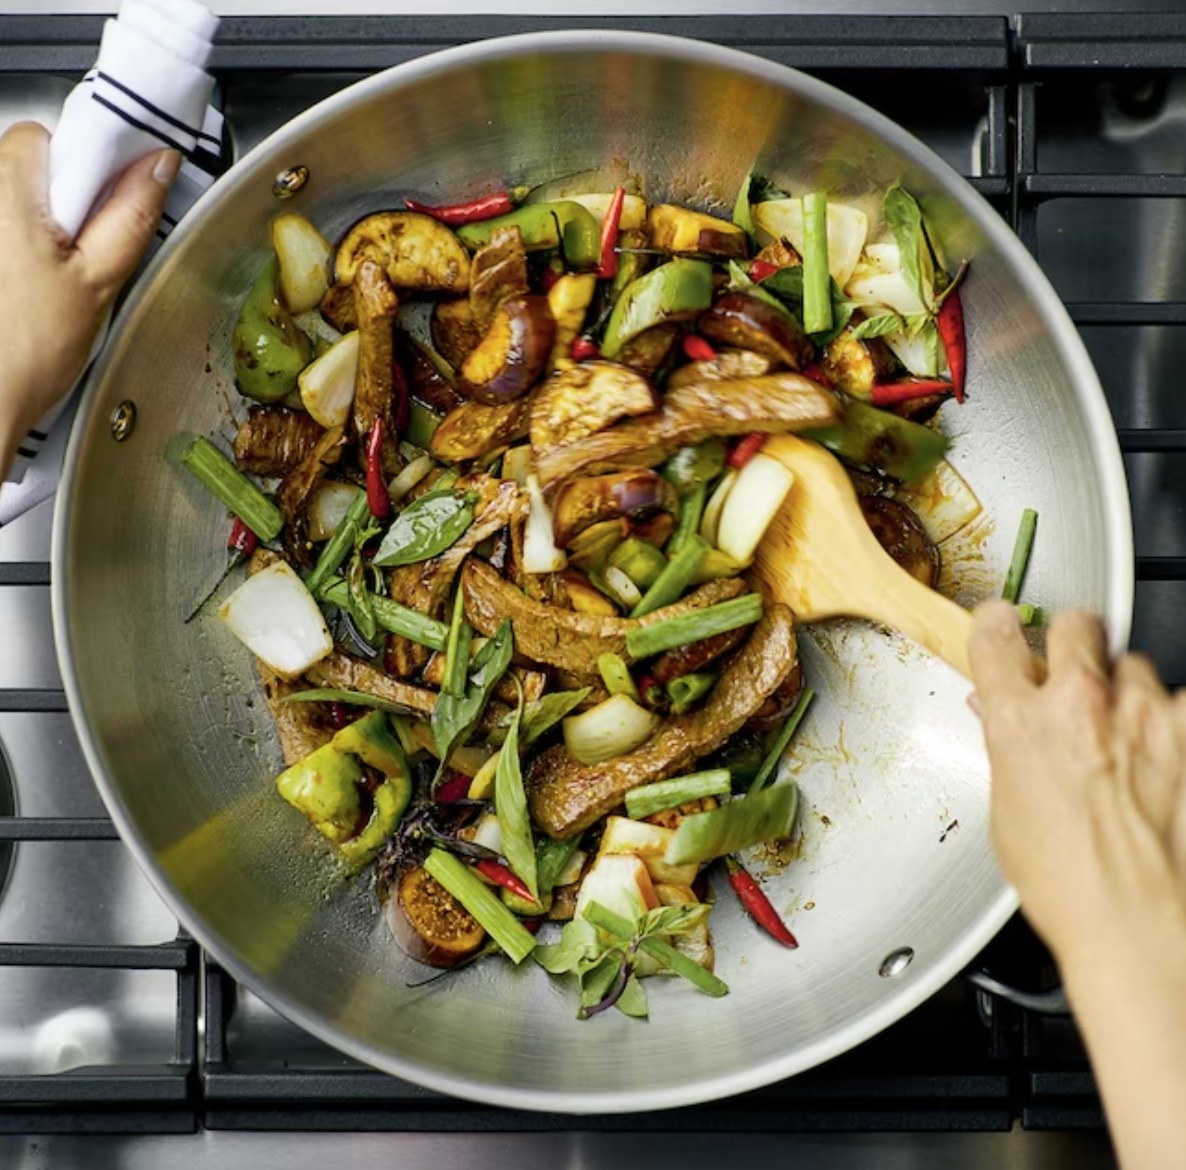 a person cooking vegetables with a wok and wooden spoon over a stove top